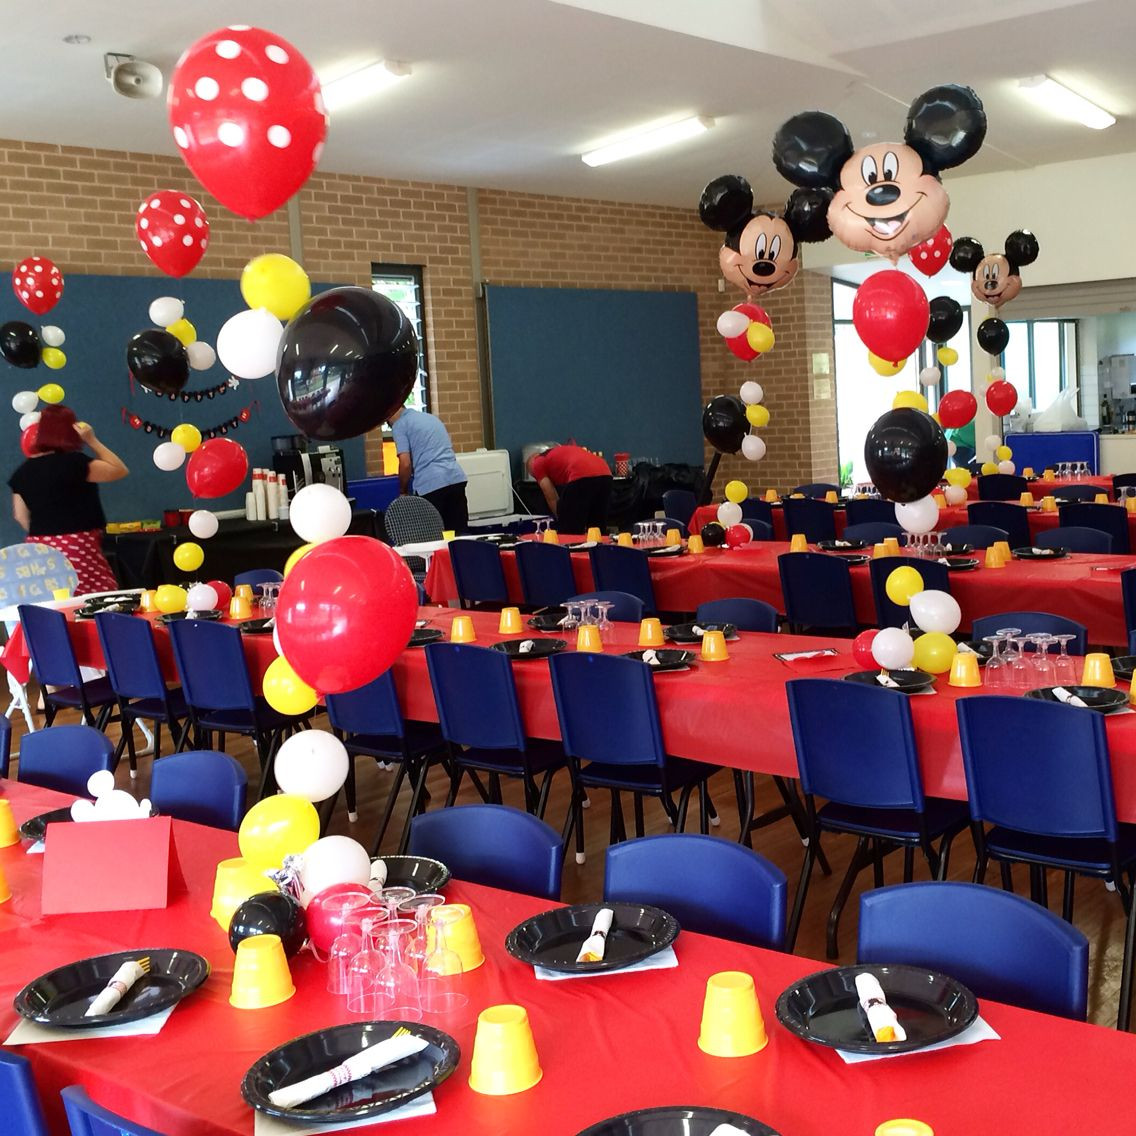 Mickey Mouse Baby Shower Decorations Party City
 Tips Awesome Mickey Mouse Birthday Party Ideas For Your